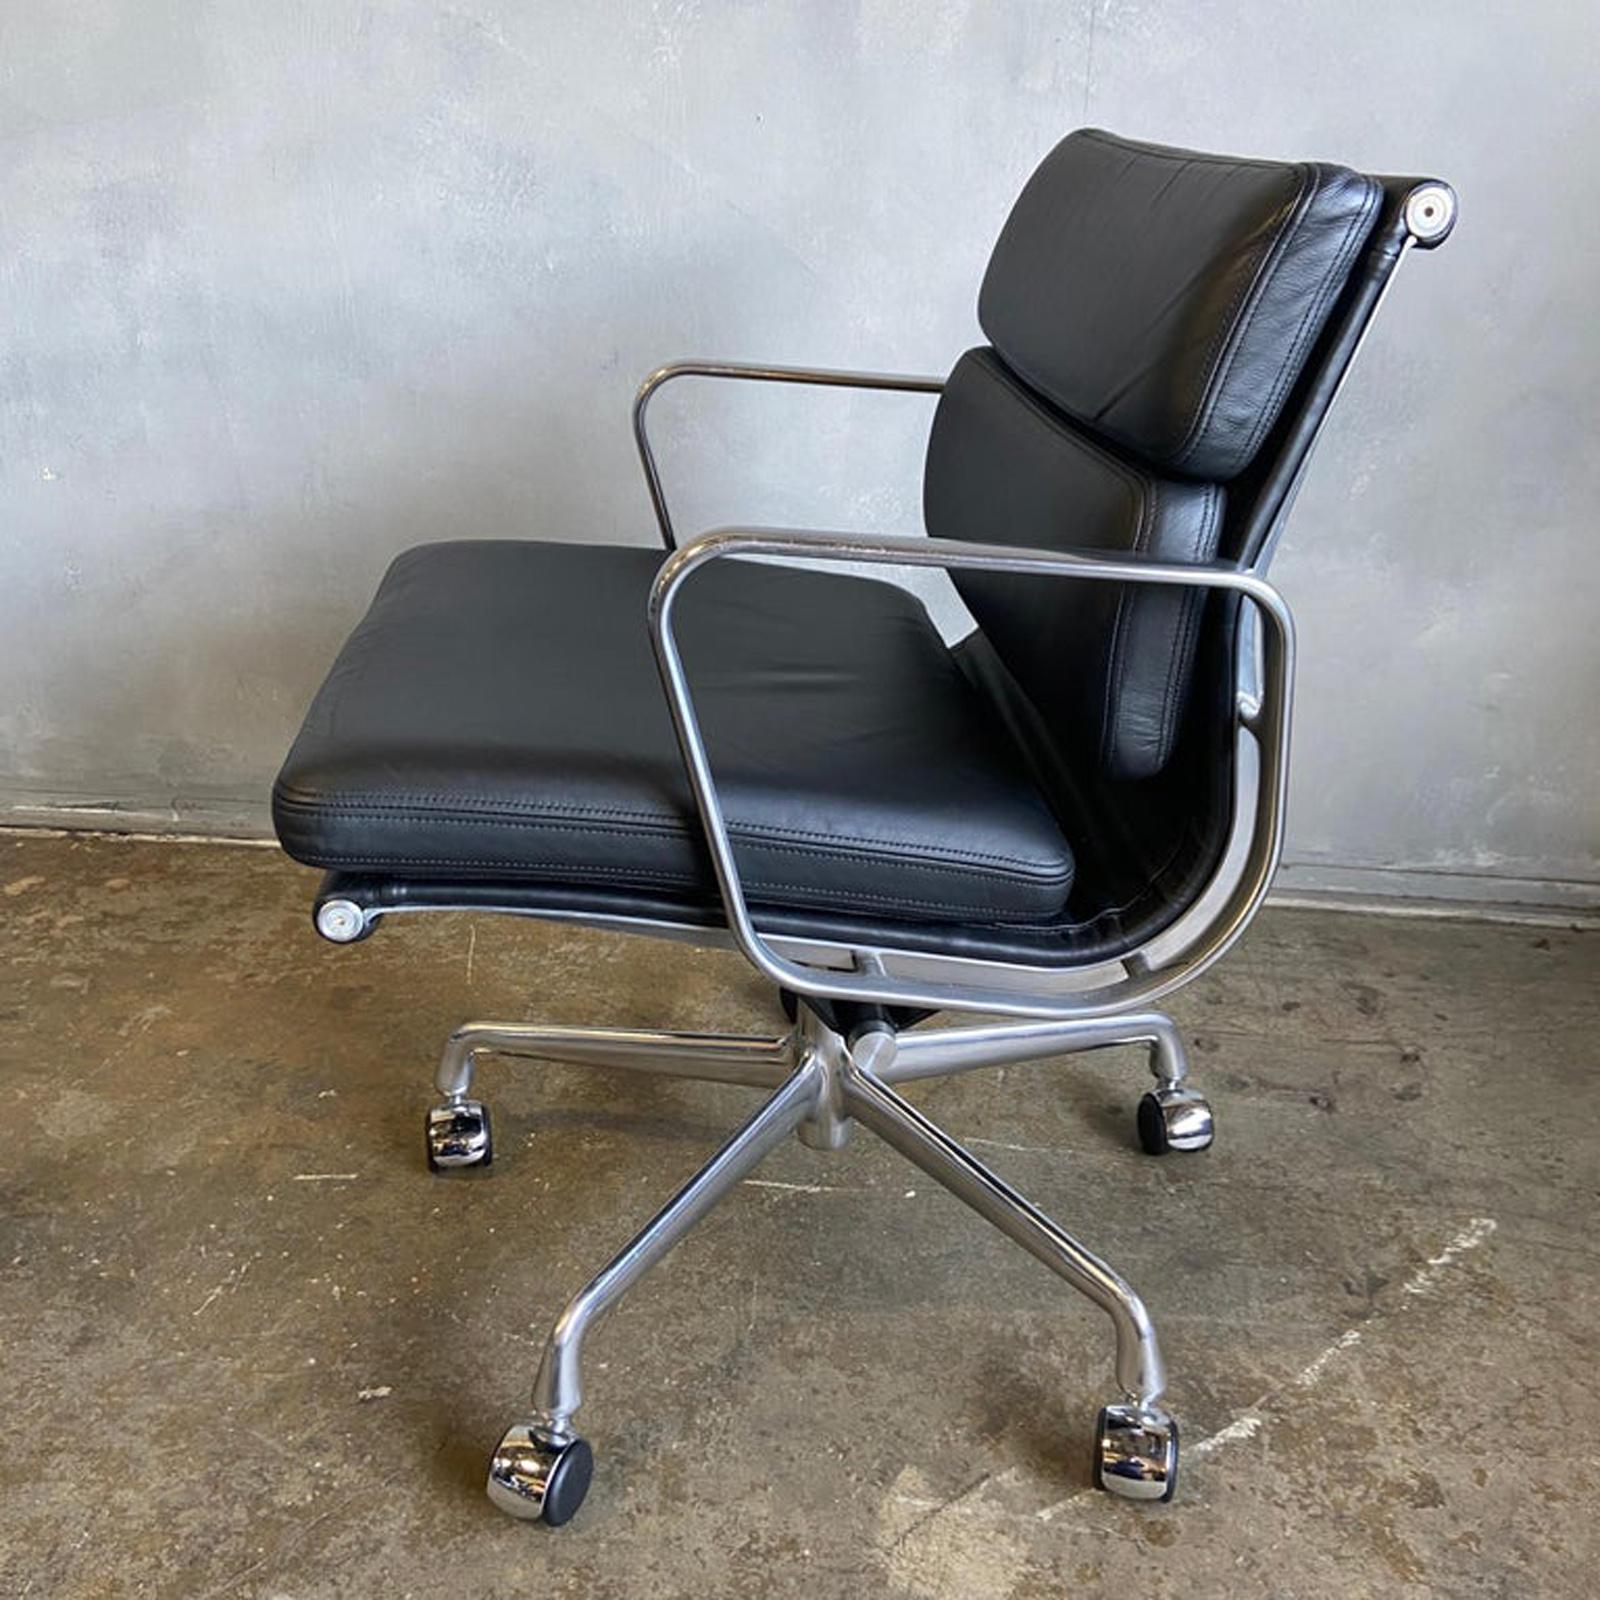 Eames for Herman Miller Soft Pad Executive chairs in black leather with low back. Full manual tilt, height adjustment, and swivel with carpet / hardwood casters. Near new old stock. Leather looks almost new and probably never sat on. 

These